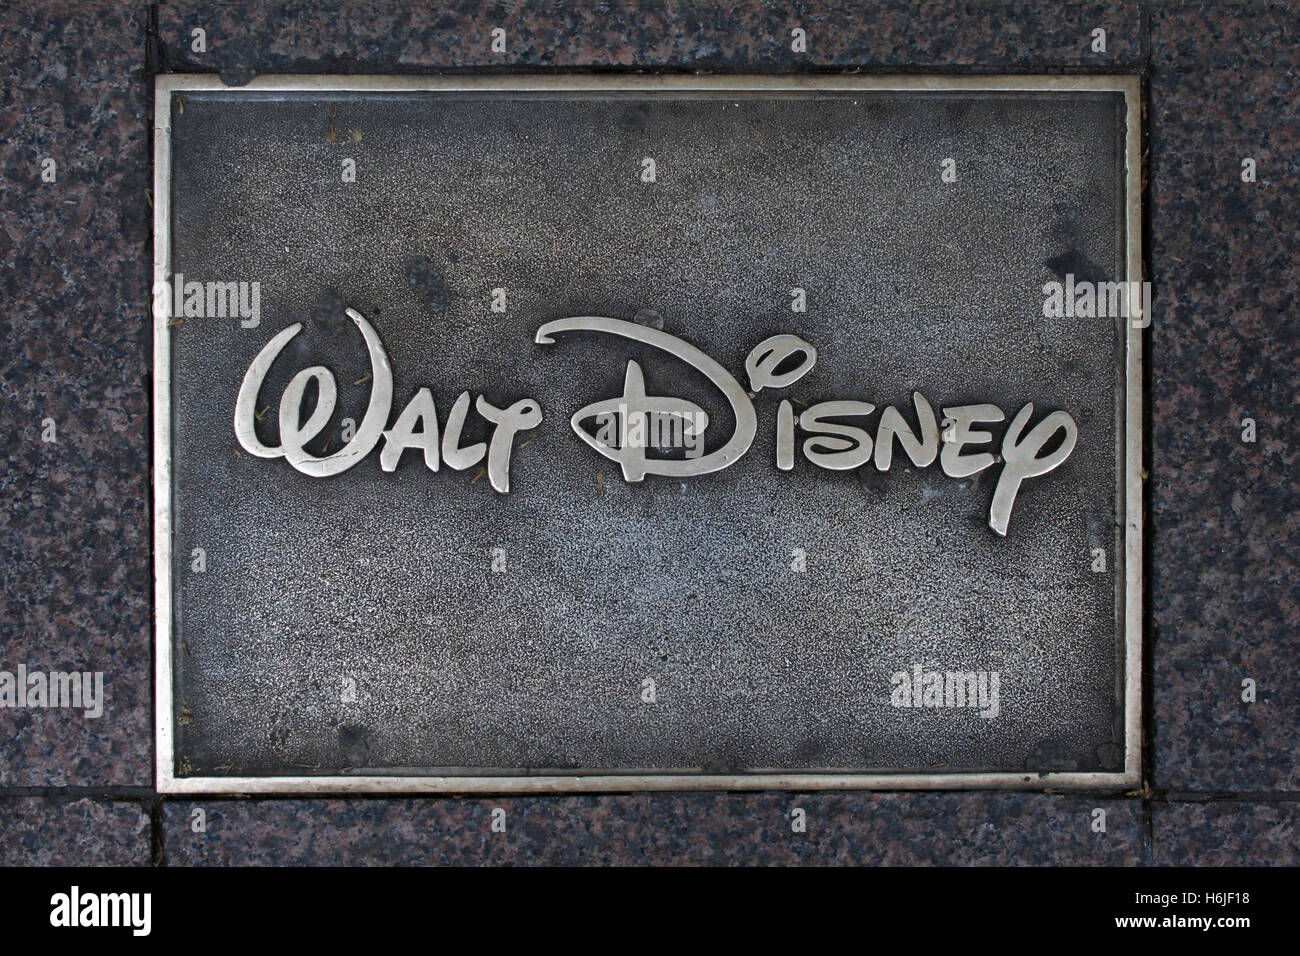 Plaque with the logo of Walt Disney, Leicester Square, London, UK. Stock Photo